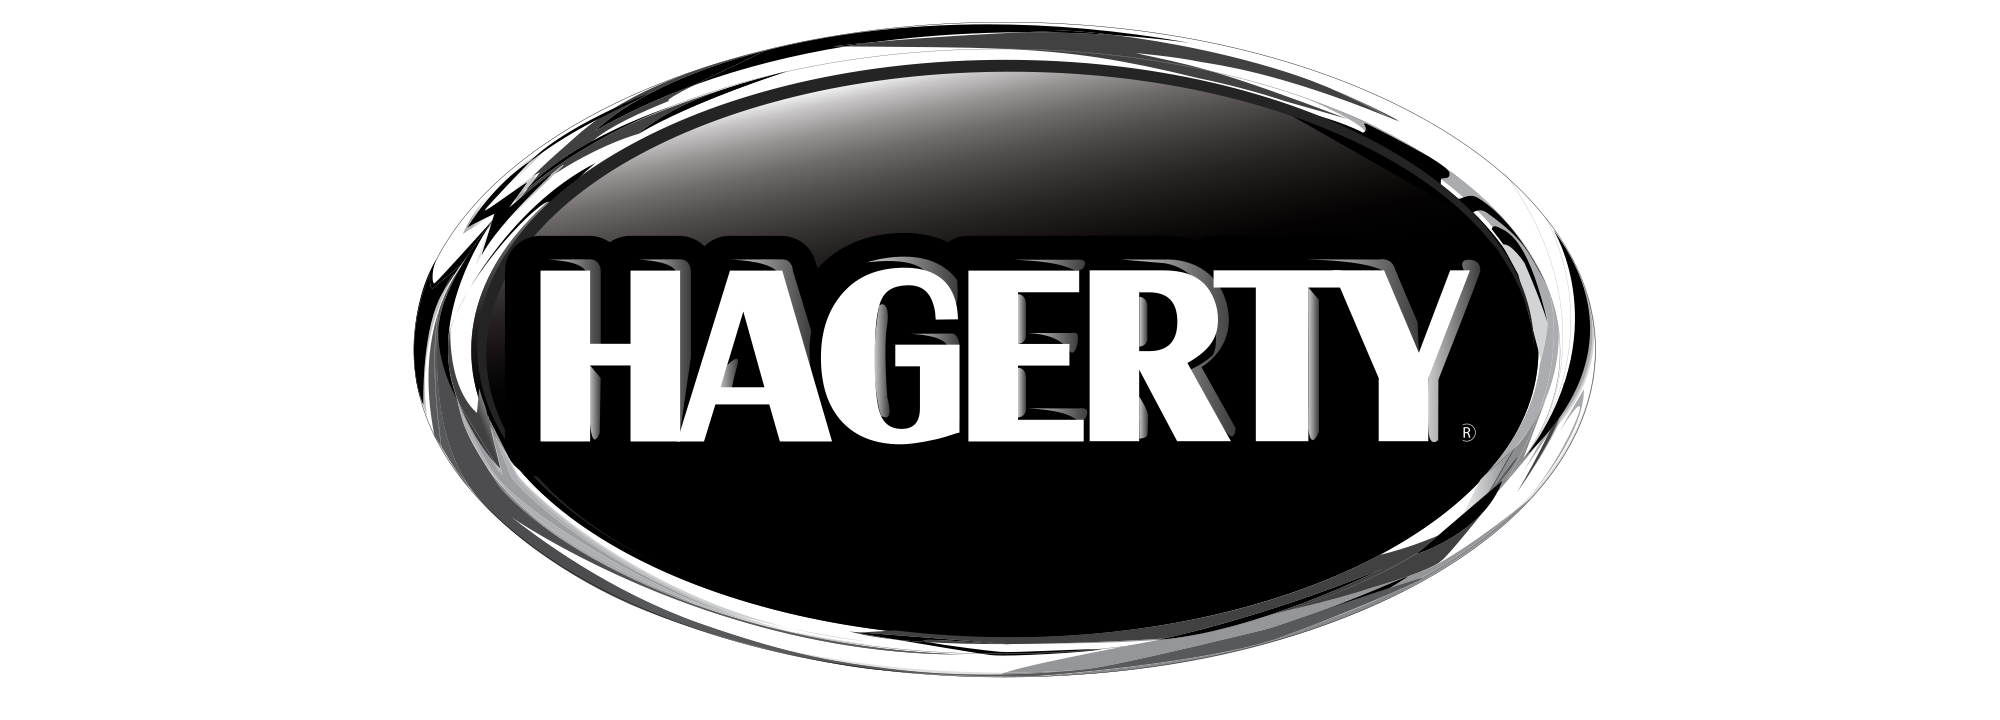 2000px-Hagerty_logo.svg_